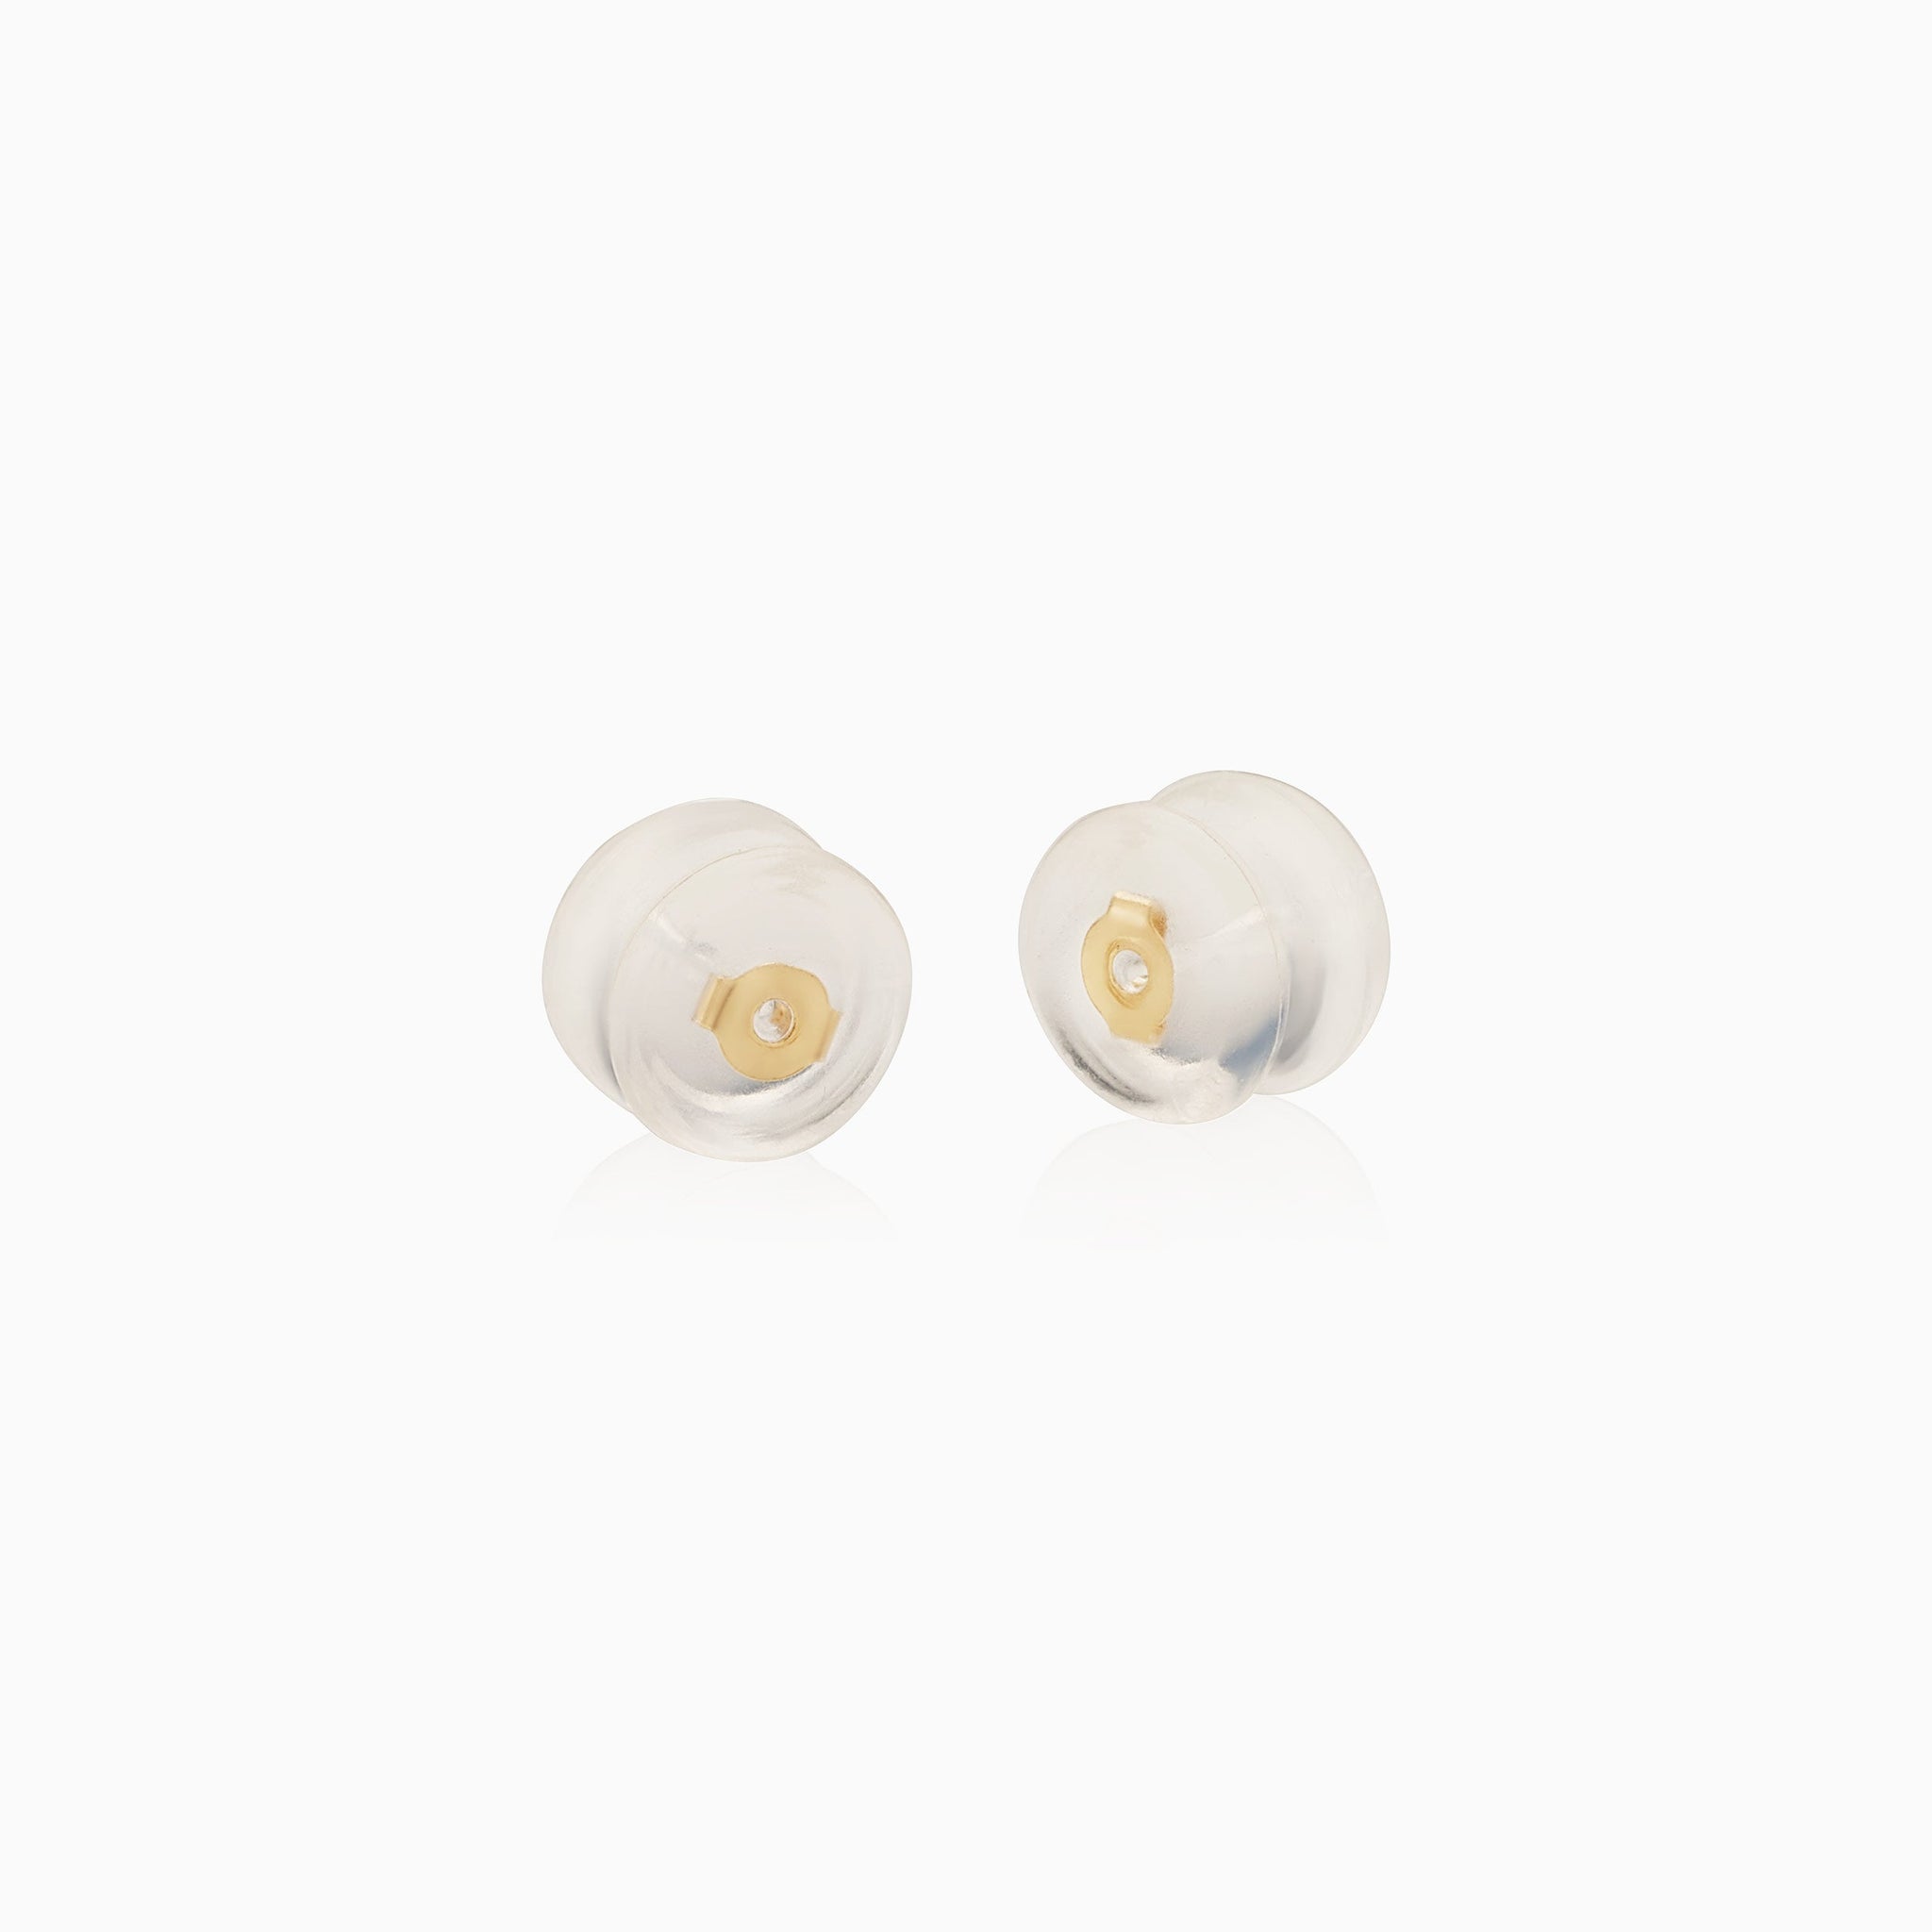 10k White Gold Ball Earrings with Safety Silicone Backs